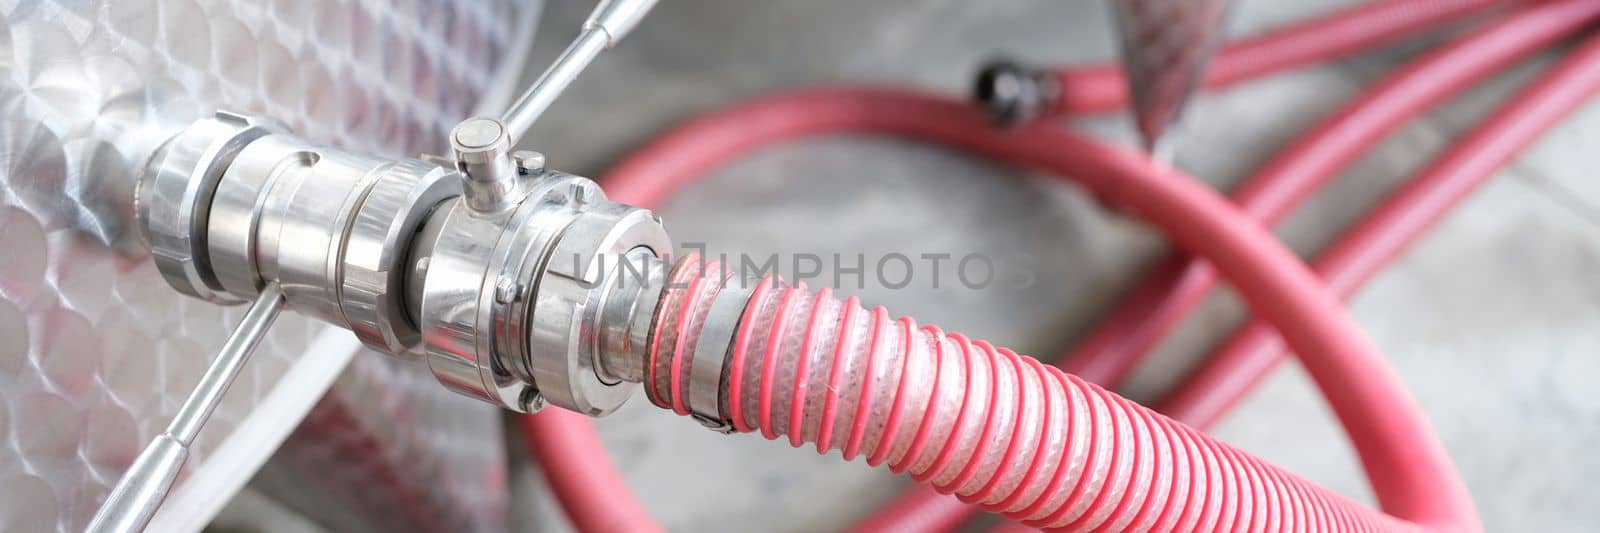 Stainless steel piping system with ball valves and hose. Production of alcoholic products of wine or chemical pharmaceuticals